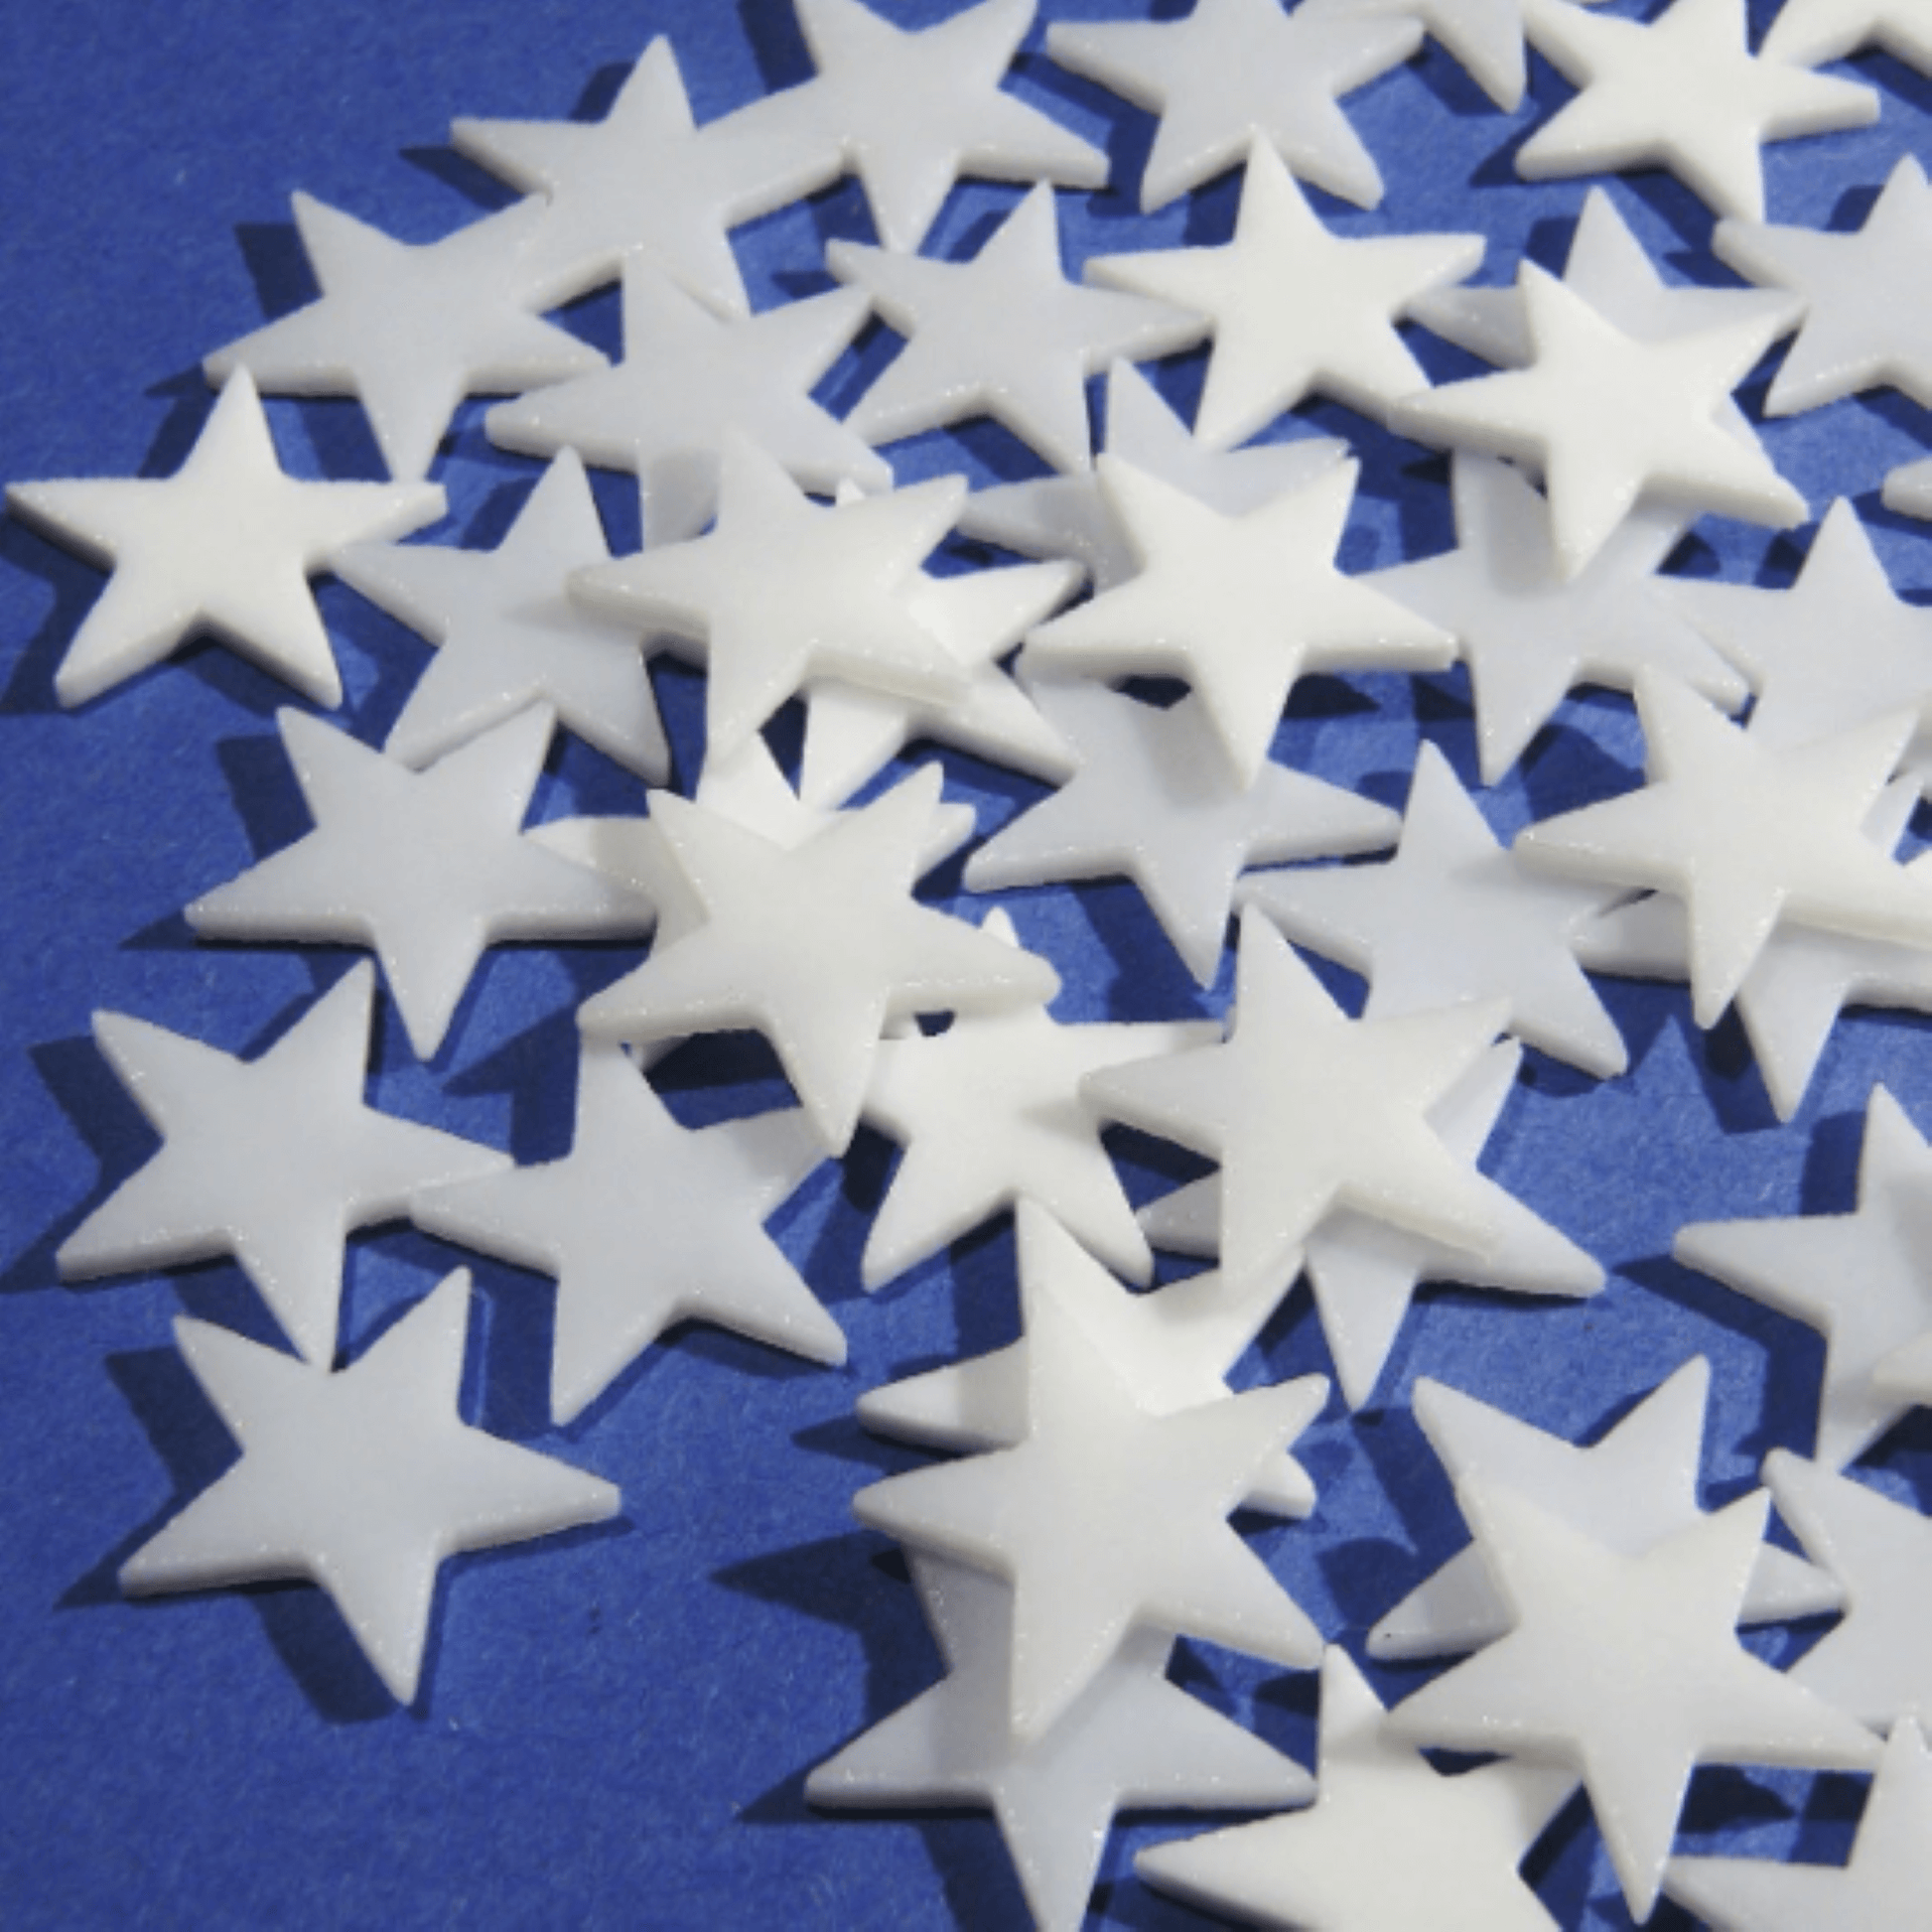 Precut Stained Glass Stars, 1" White Glass Stars 96 COE for Fusing, Mosaics, Jewelry, Stained Glass